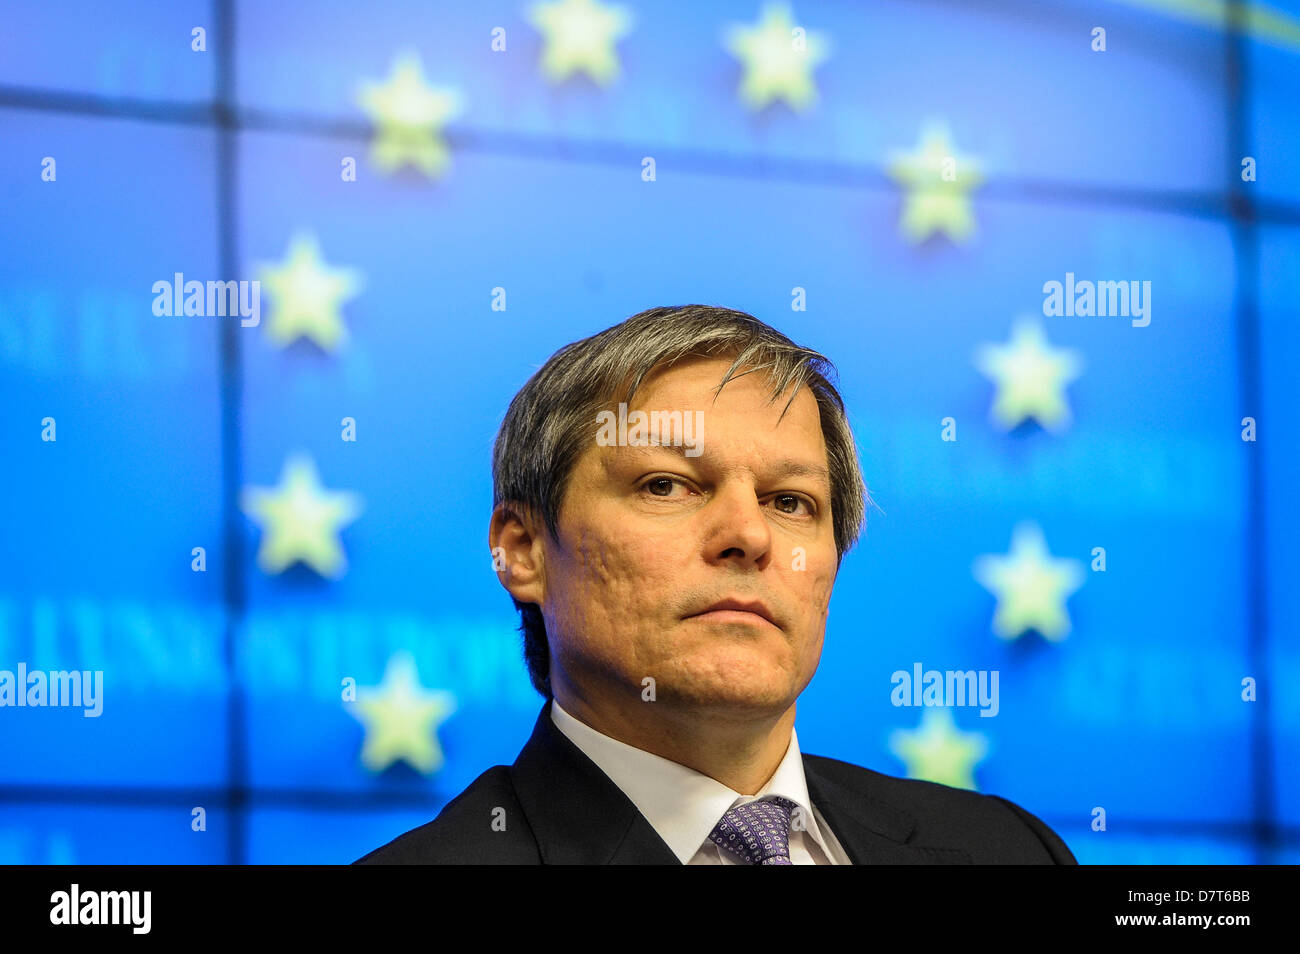 Dacian Ciolos, the European Commissioner for Agriculture and Rural Development  speak during press conference after   Agriculture and Fisheries council at the EU Headquarters  in Brussels, Belgium on 13.05.2013 Fisheries ministers meet  to revise their position on the reform of EU fishing rules. The reluctance of some countries, including France, Spain and Poland, to find common ground with the Parliament on key issues of the reform is threatening to cause the collapse of negotiations on a new Common Fisheries Policy (CFP).  by Wiktor Dabkowski Stock Photo